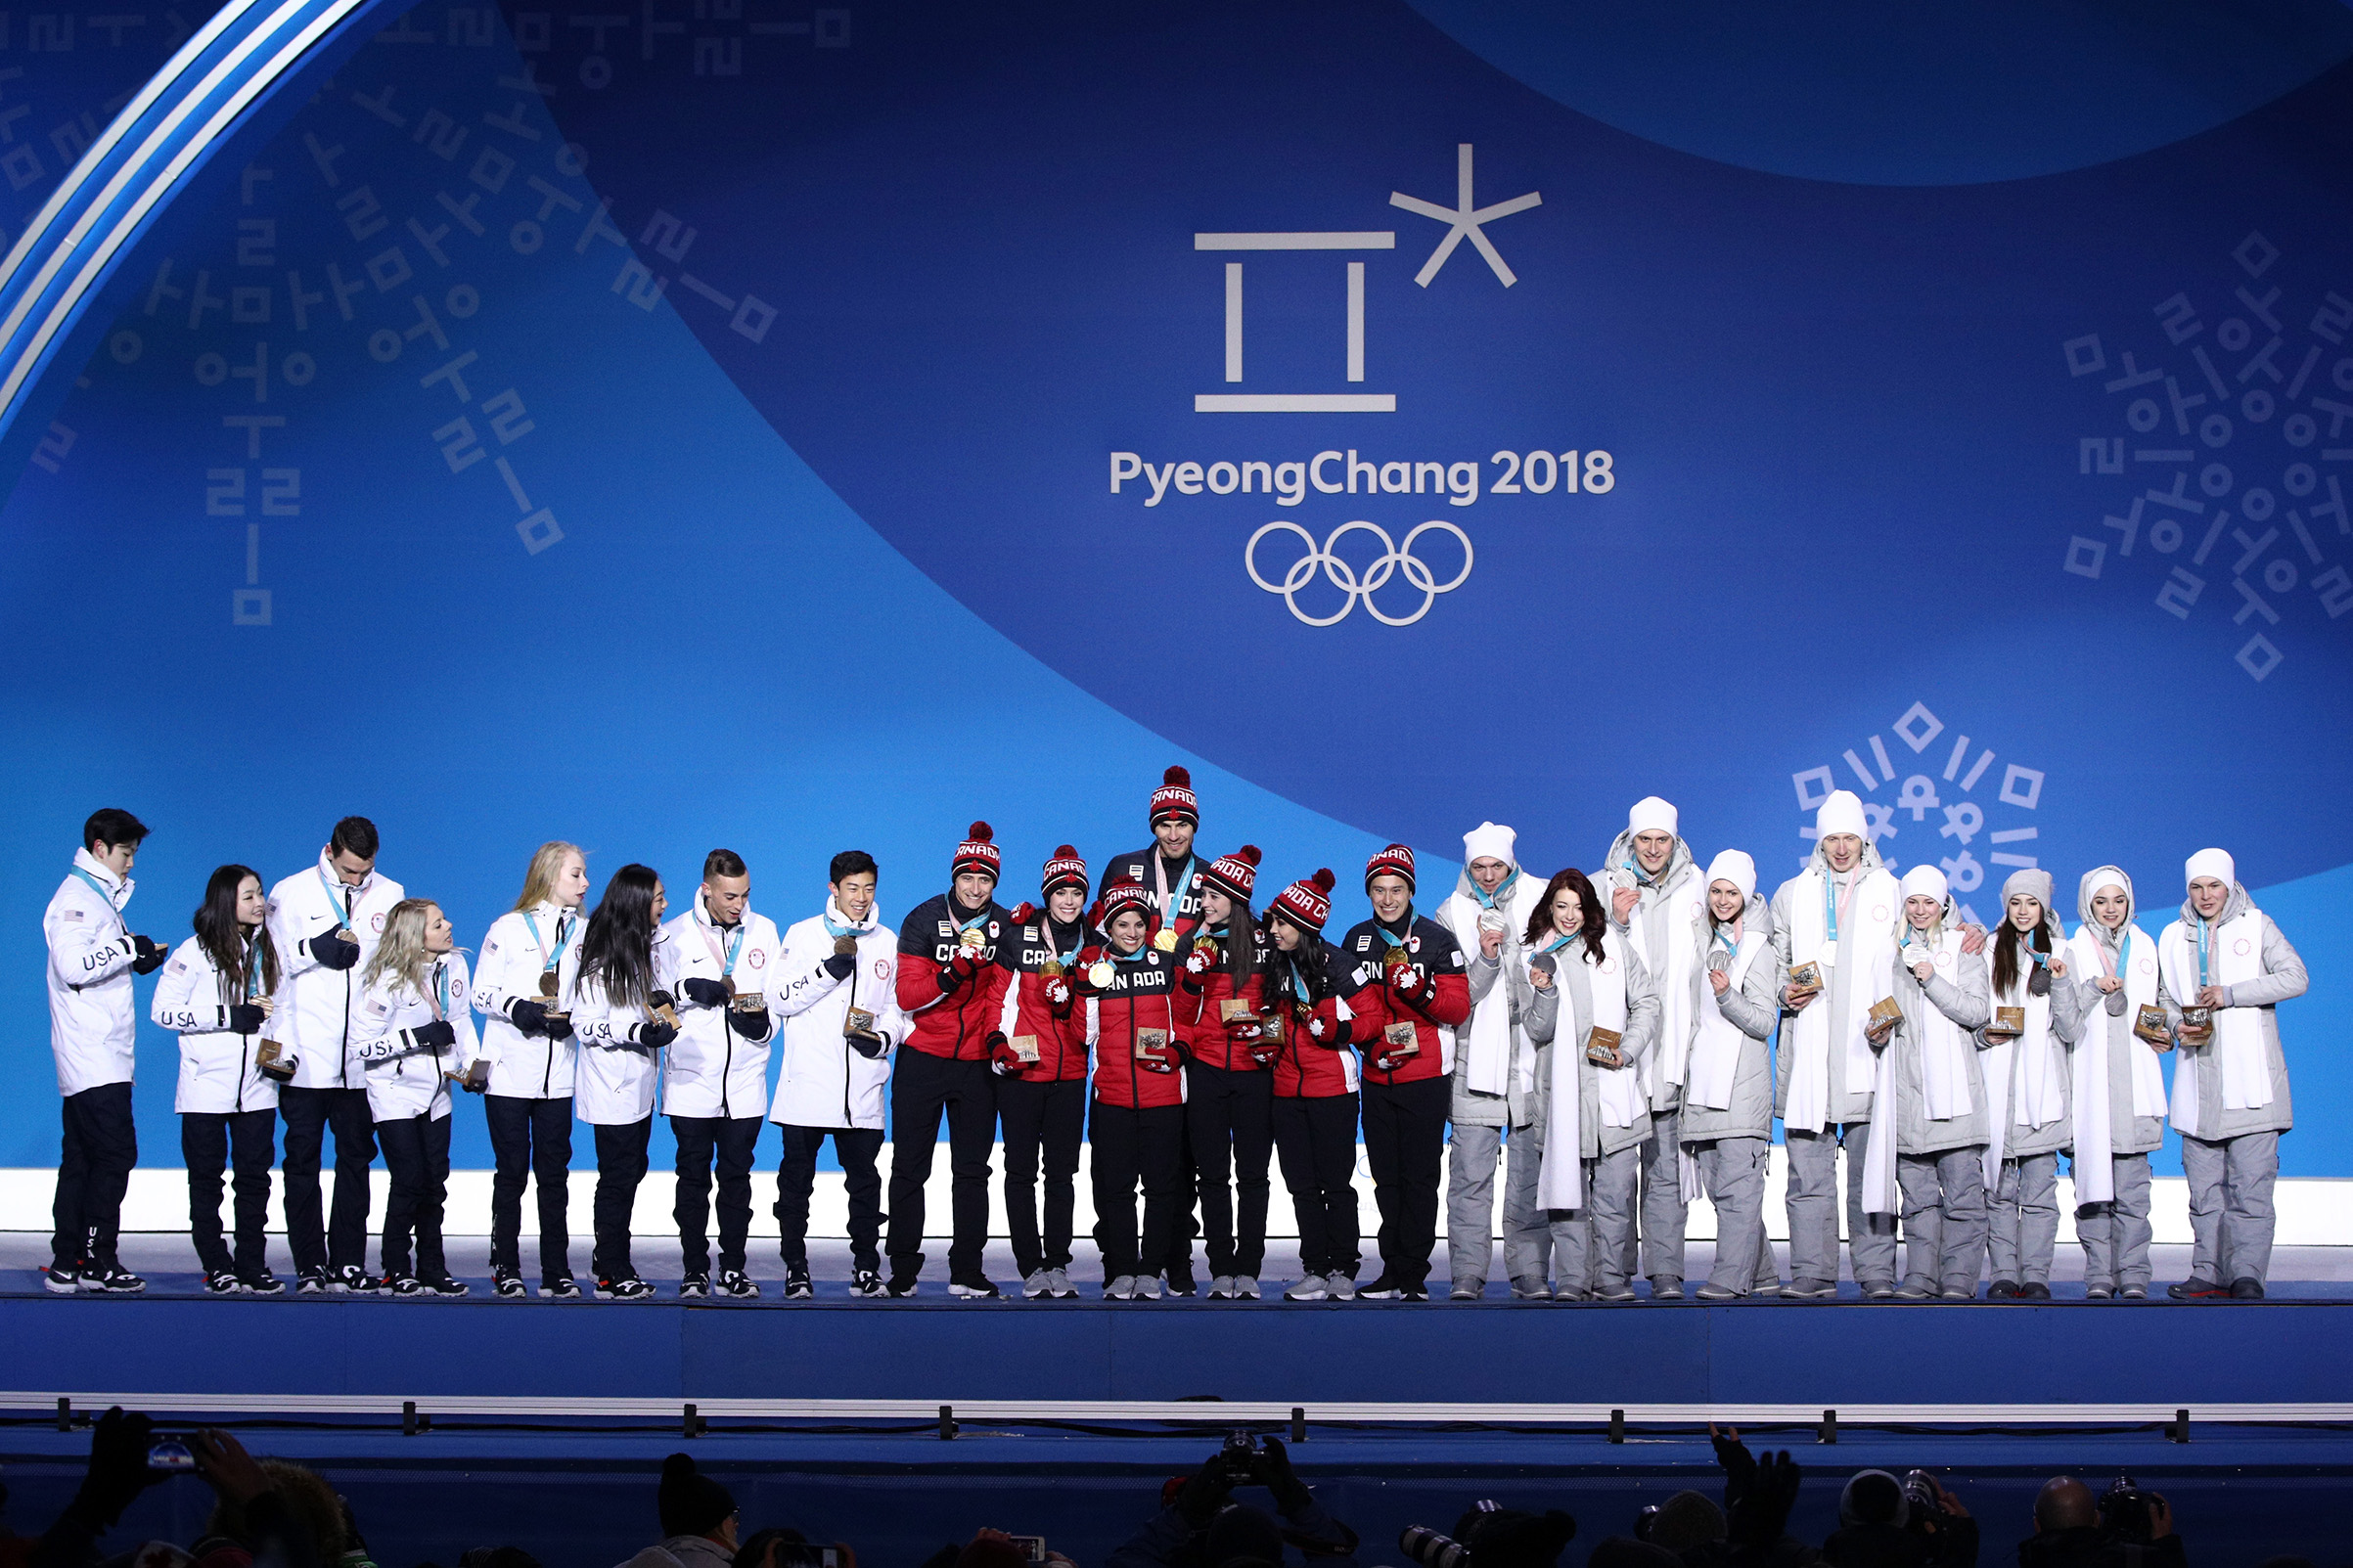 Silver medalists Team Olympic Athlete from Russia, gold medalists Team Canada and bronze medalists Team United States celebrate during the medal ceremony after the Figure Skating Team Event at Medal Plaza on Feb. 12, 2018 in Pyeongchang-gun, South Korea. (Adam Pretty—Getty Images)